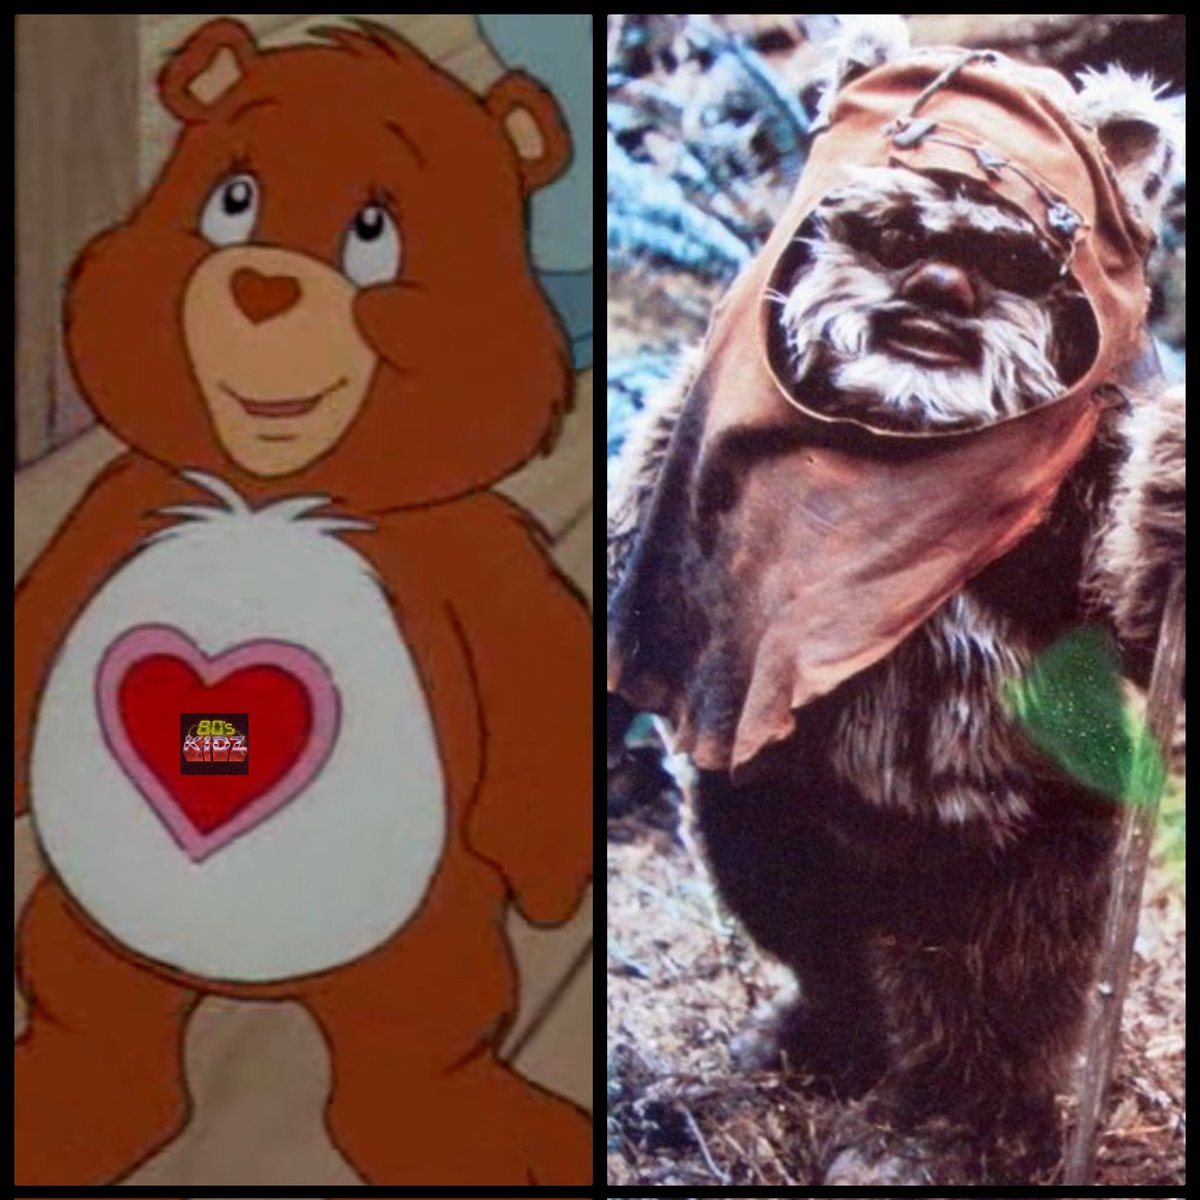 Ewoks are just homeless Carebears who have lost their powers and got hooked on some bad stuff.